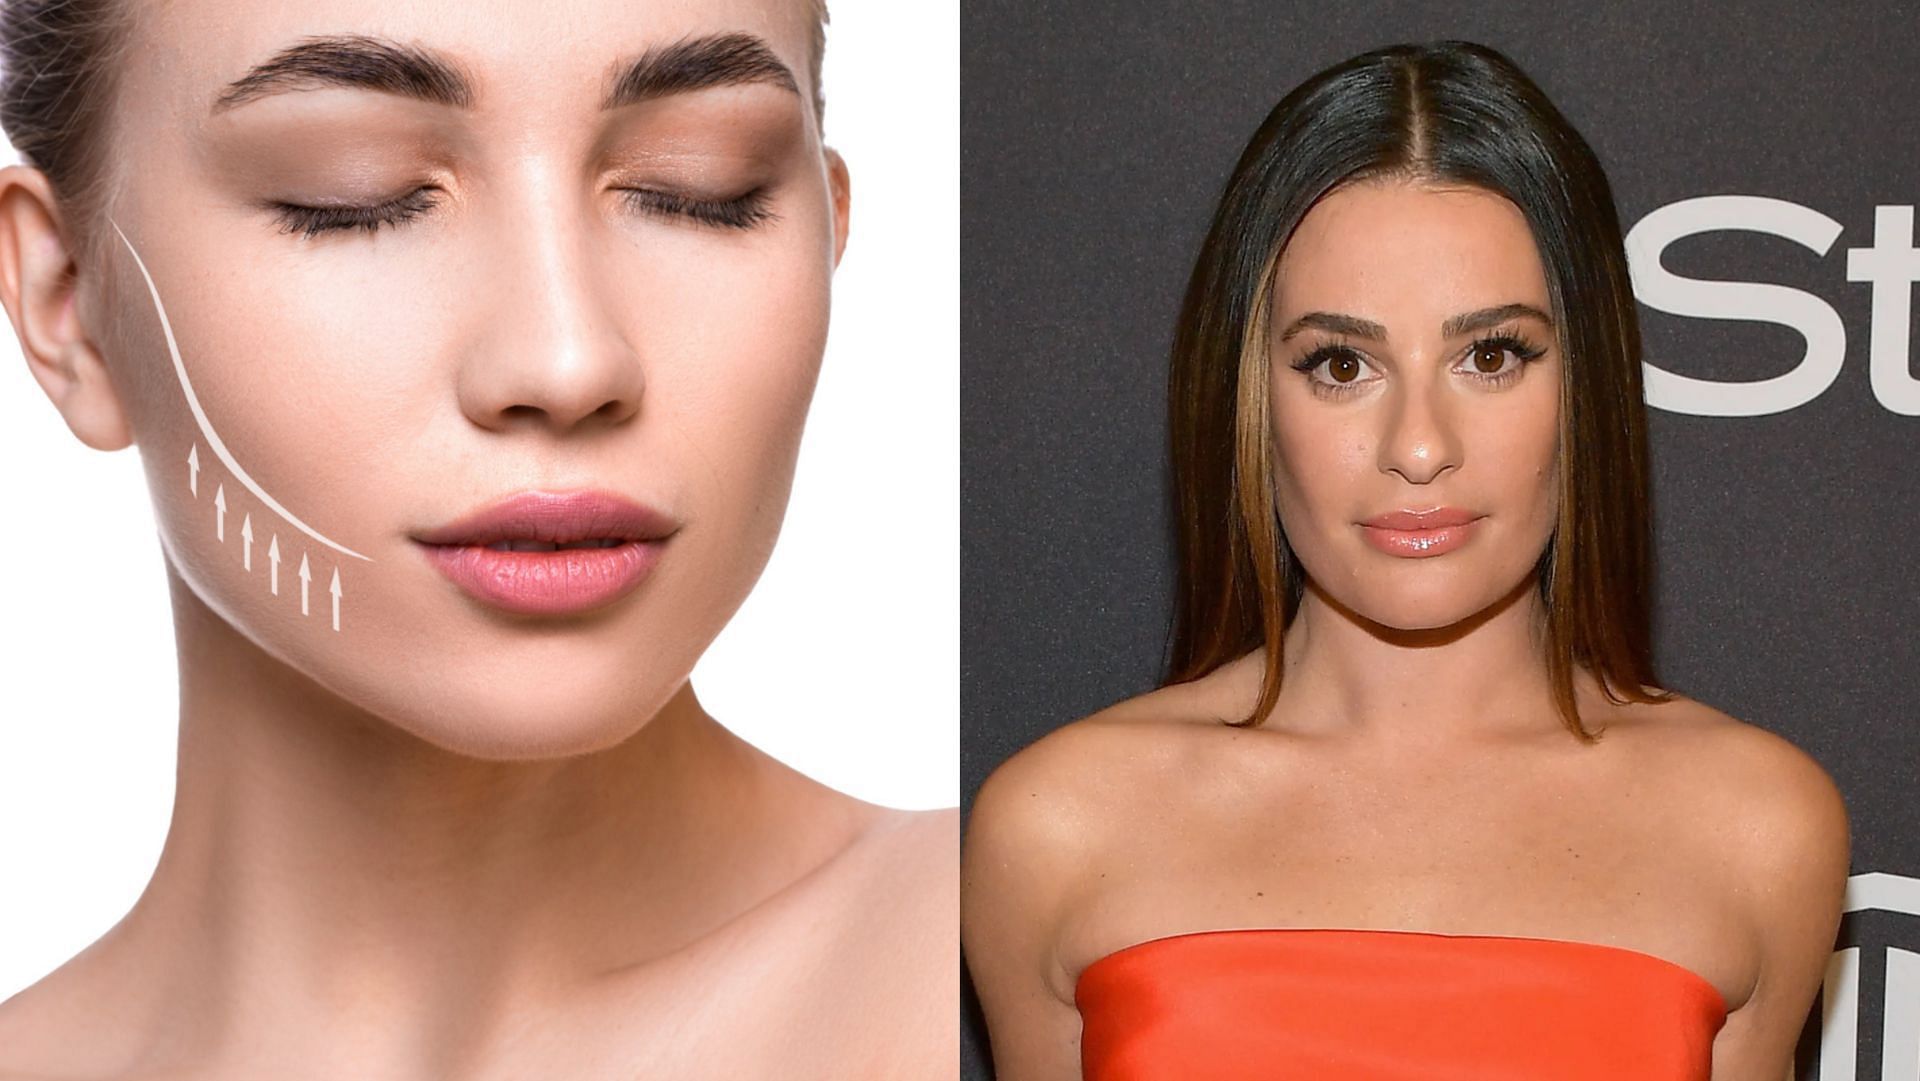 Buccal fat removal has become a popular trend among celebrities to have more defined faces. (Photo via Dmitry Belyaev/iStock/Getty Images Plus, Matt Winkelmeyer/Getty)